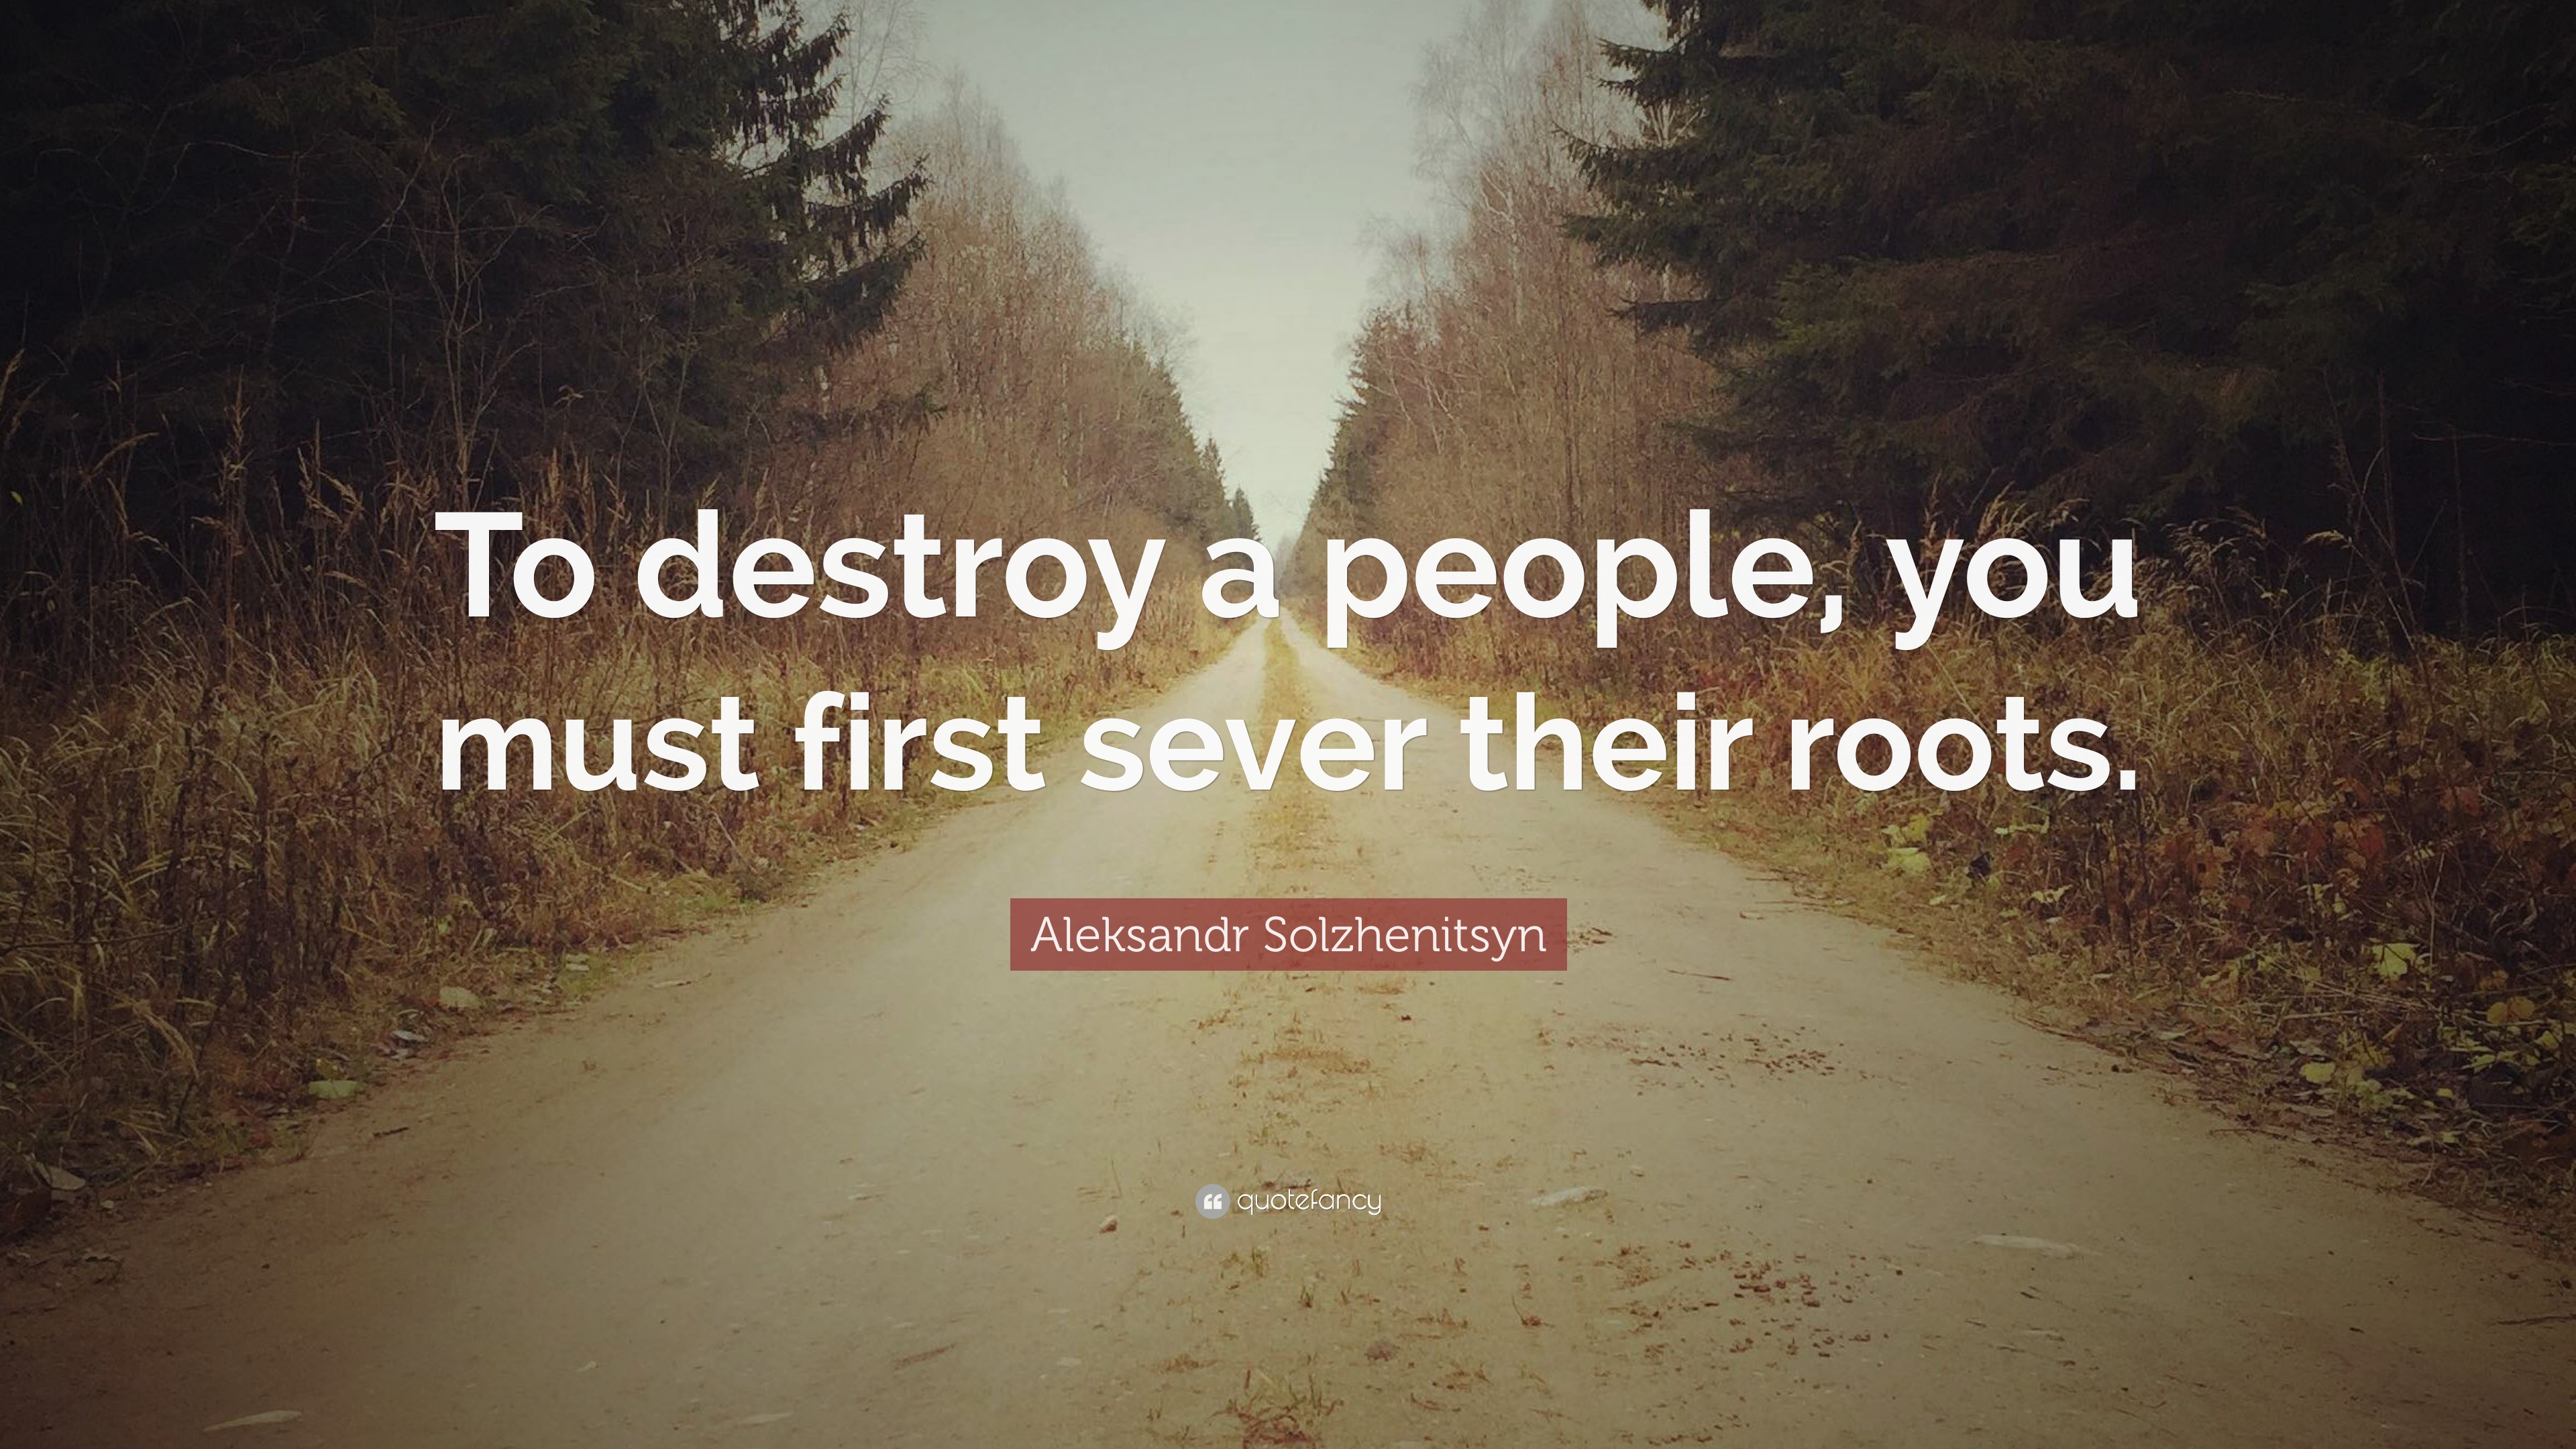 2274161-Aleksandr-Solzhenitsyn-Quote-To-destroy-a-people-you-must-first.jpg